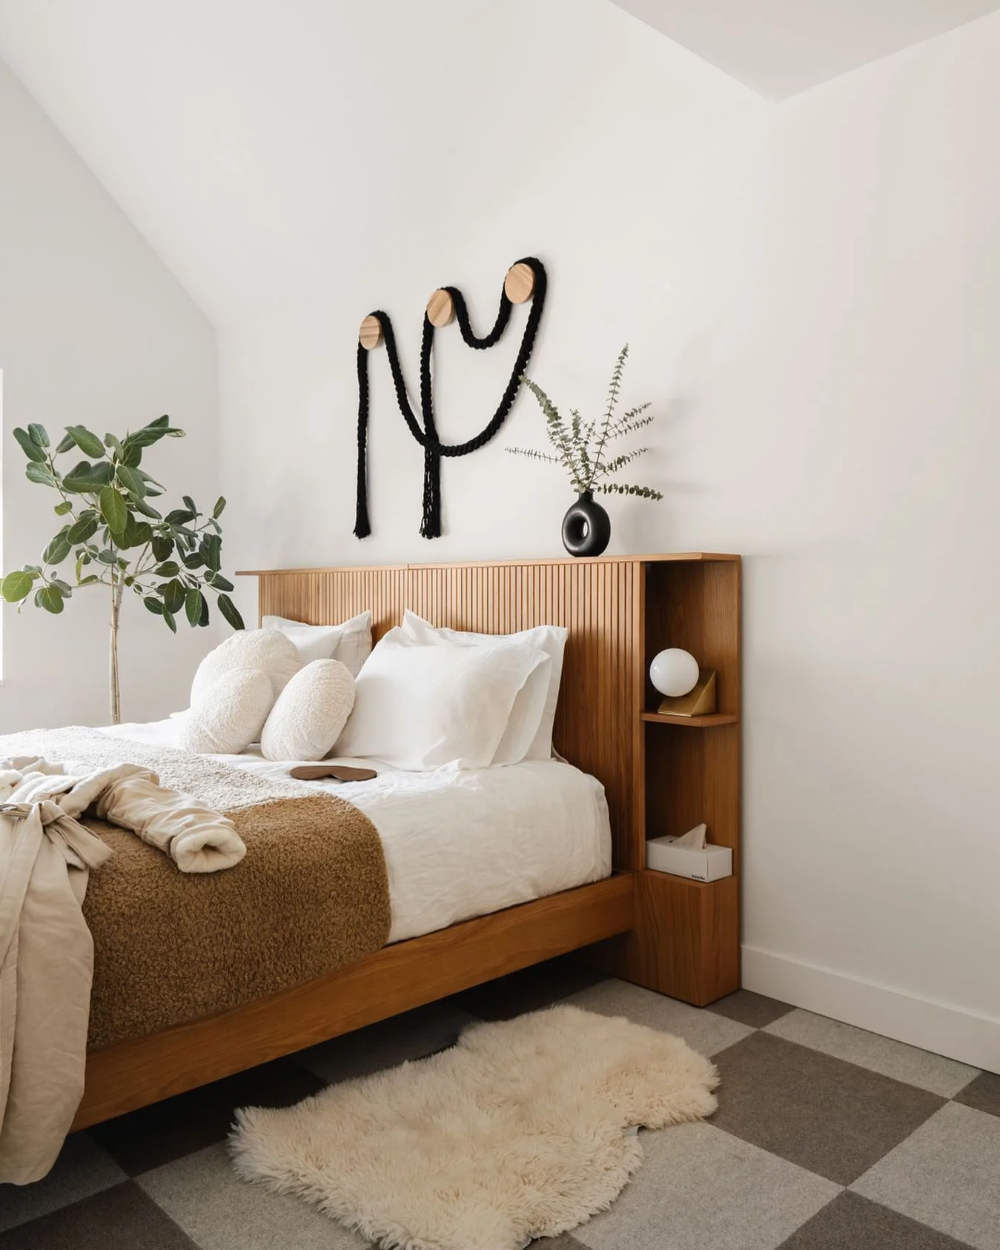 Maximize Your Bedroom Space with a Bed Frame Featuring Headboard Storage